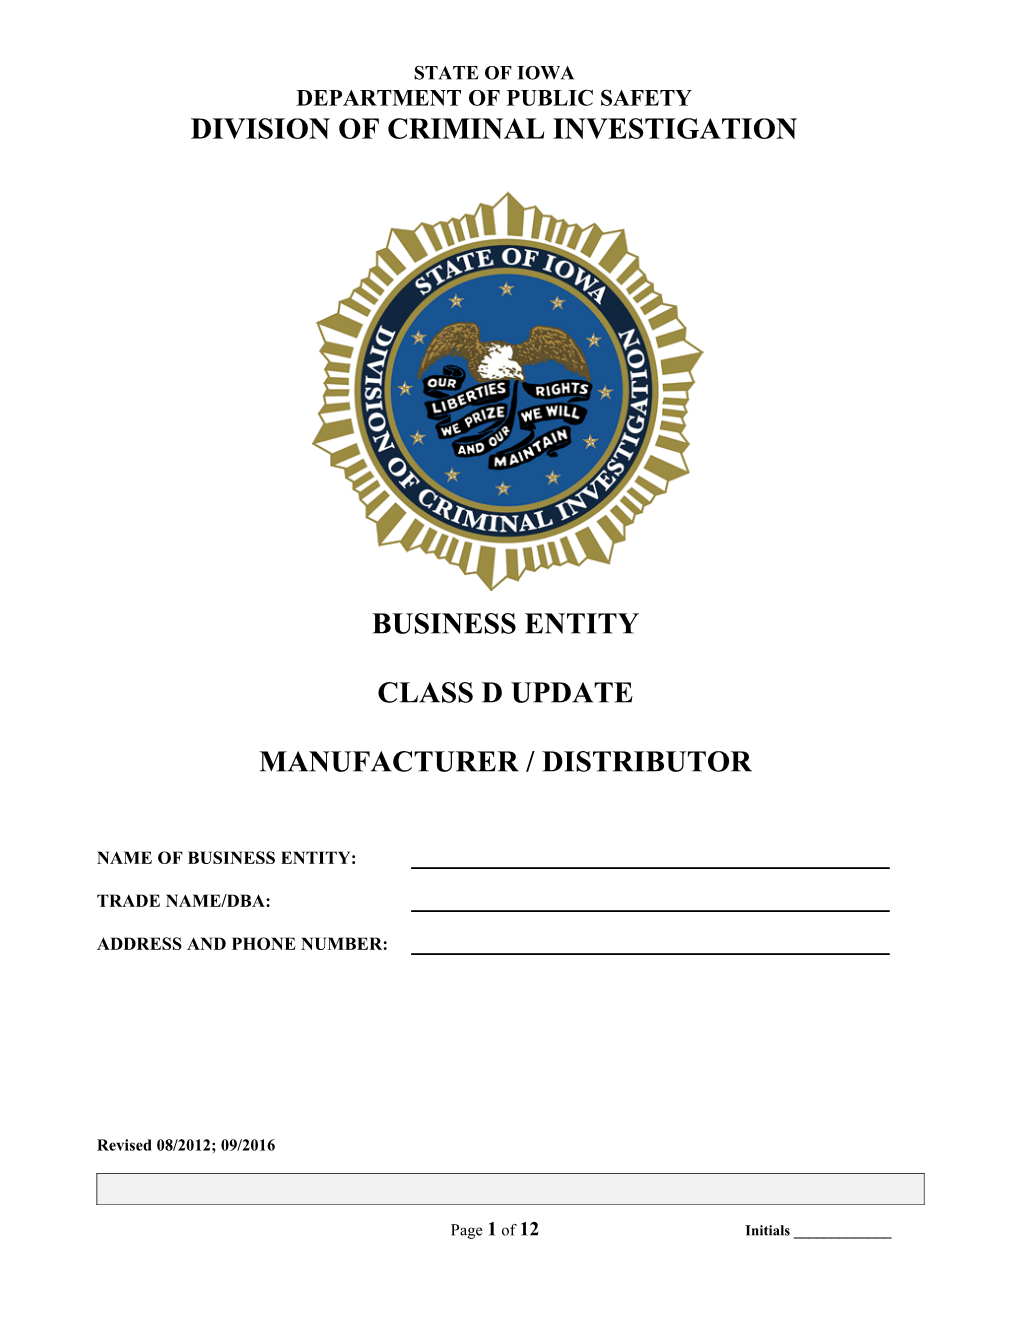 Business License Application